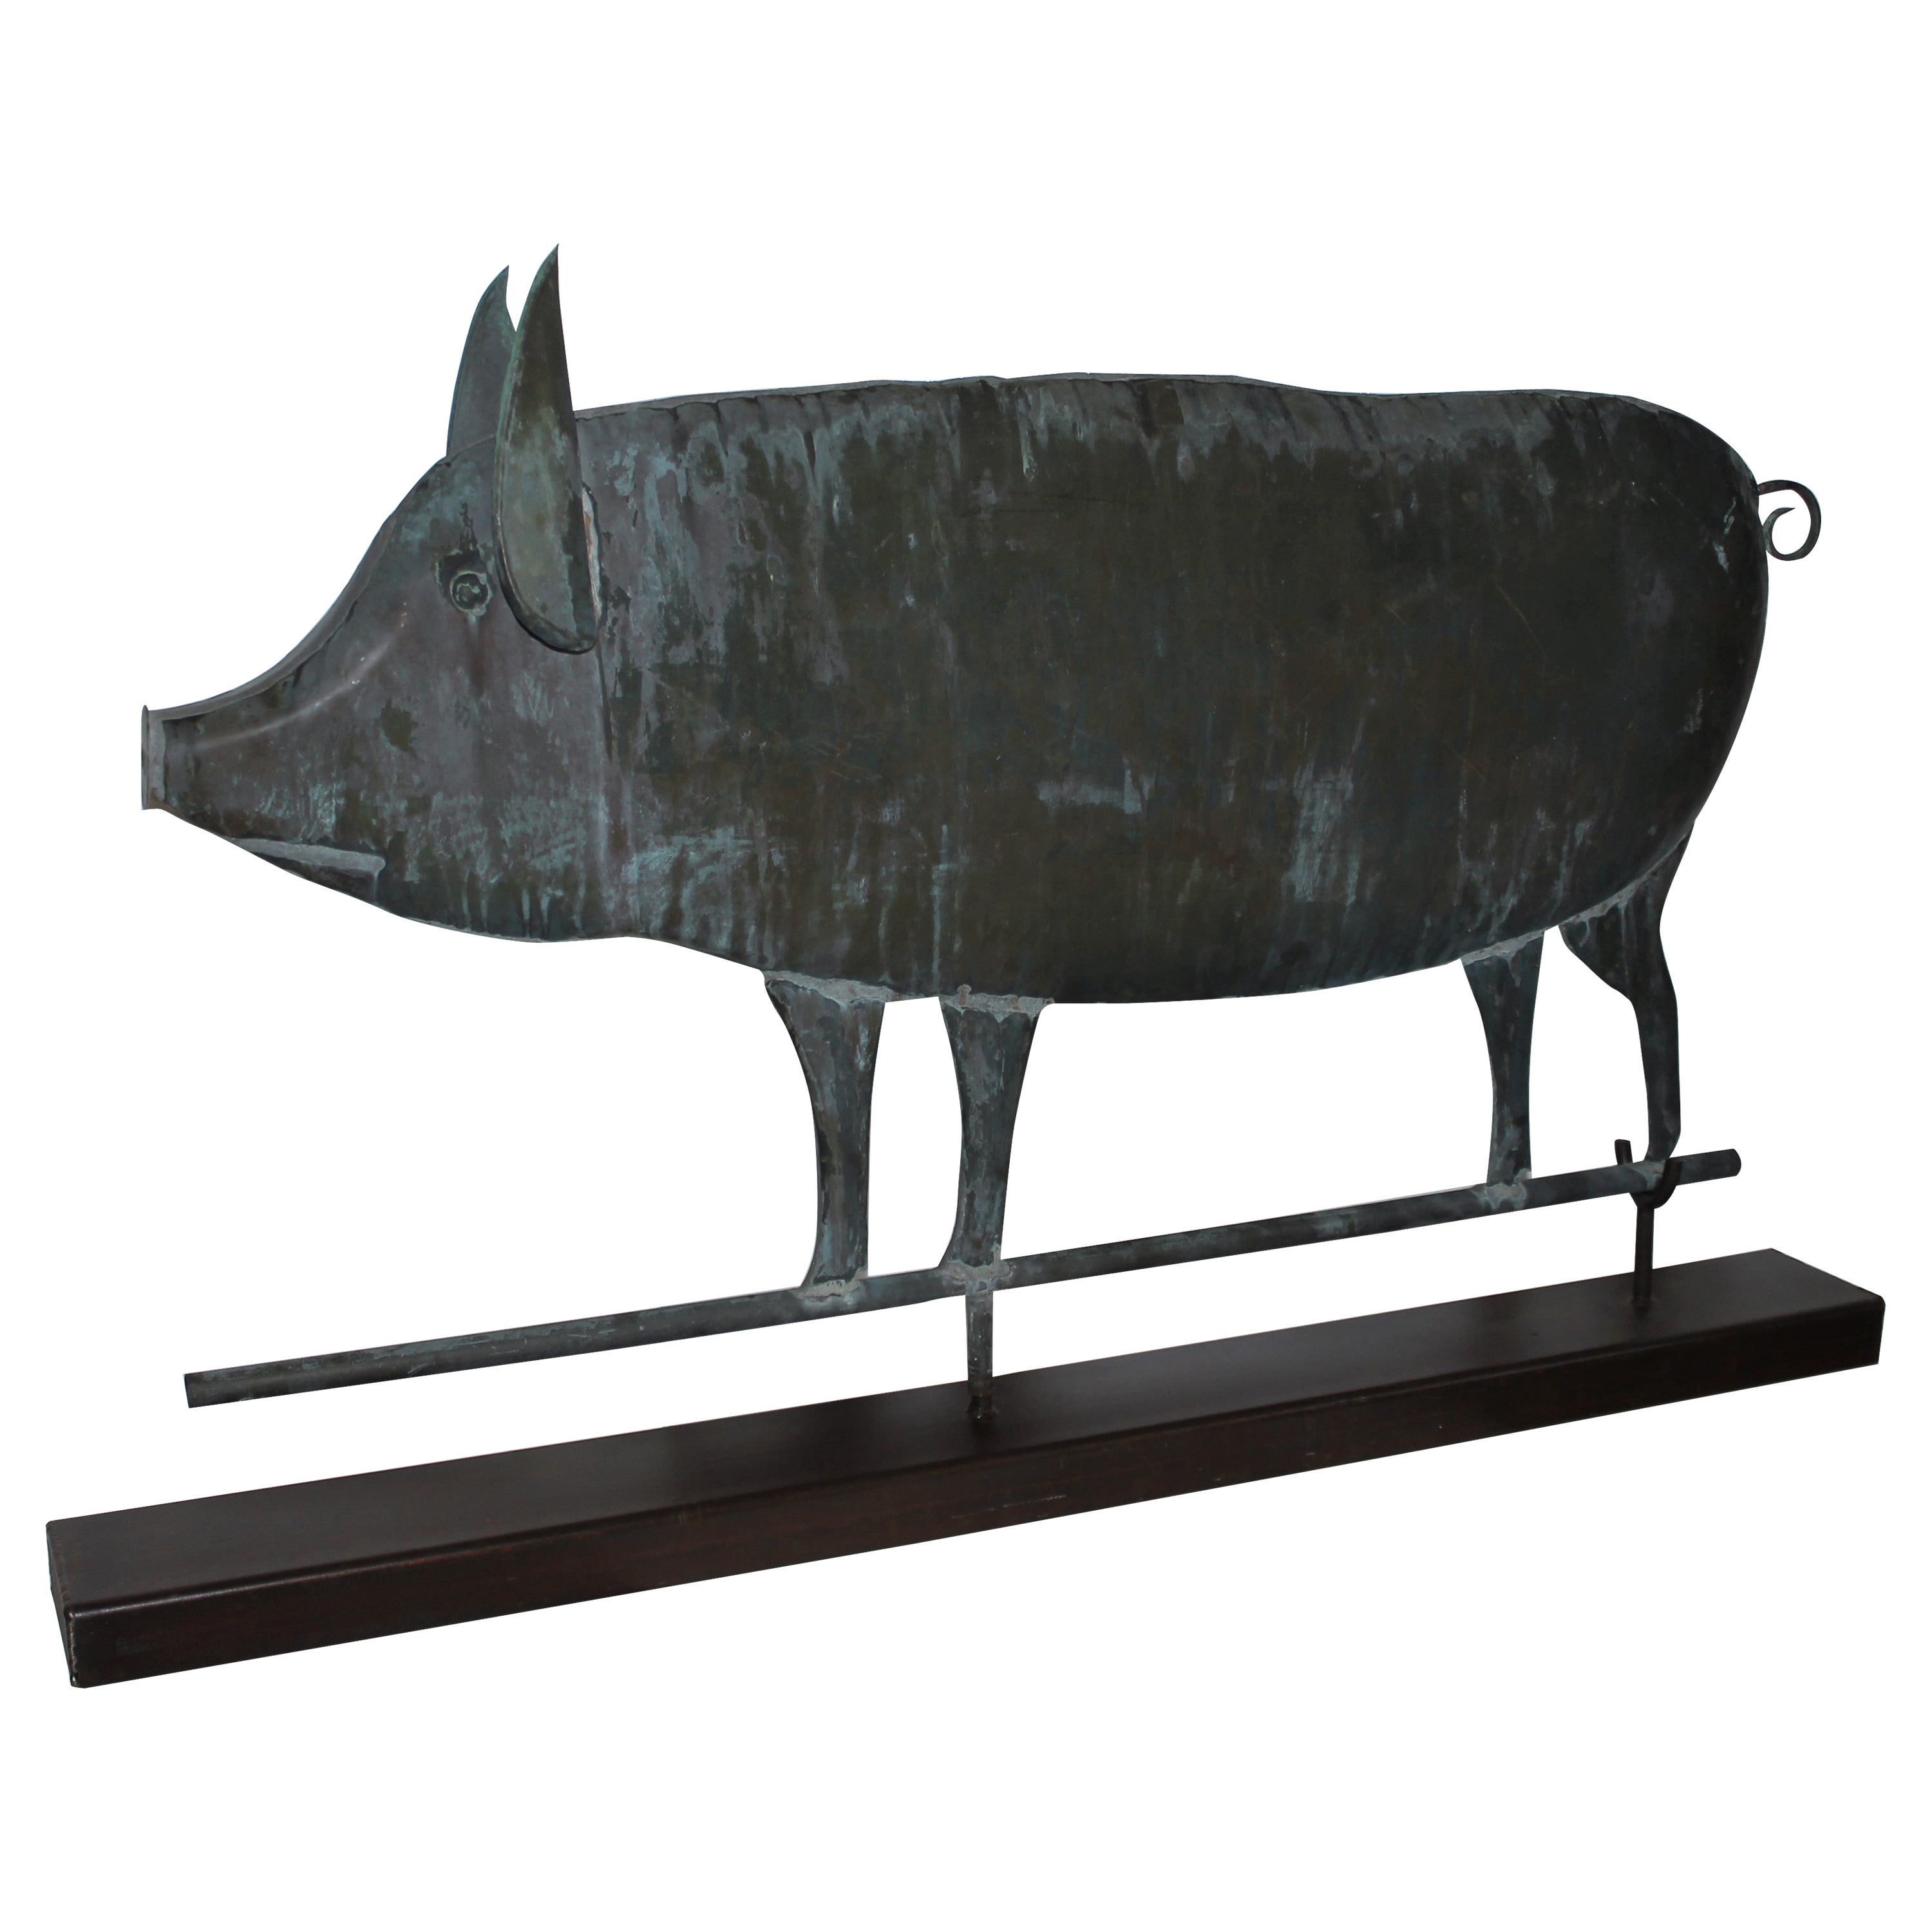 Early 20thc Monumental Pig Weather Vane on Stand